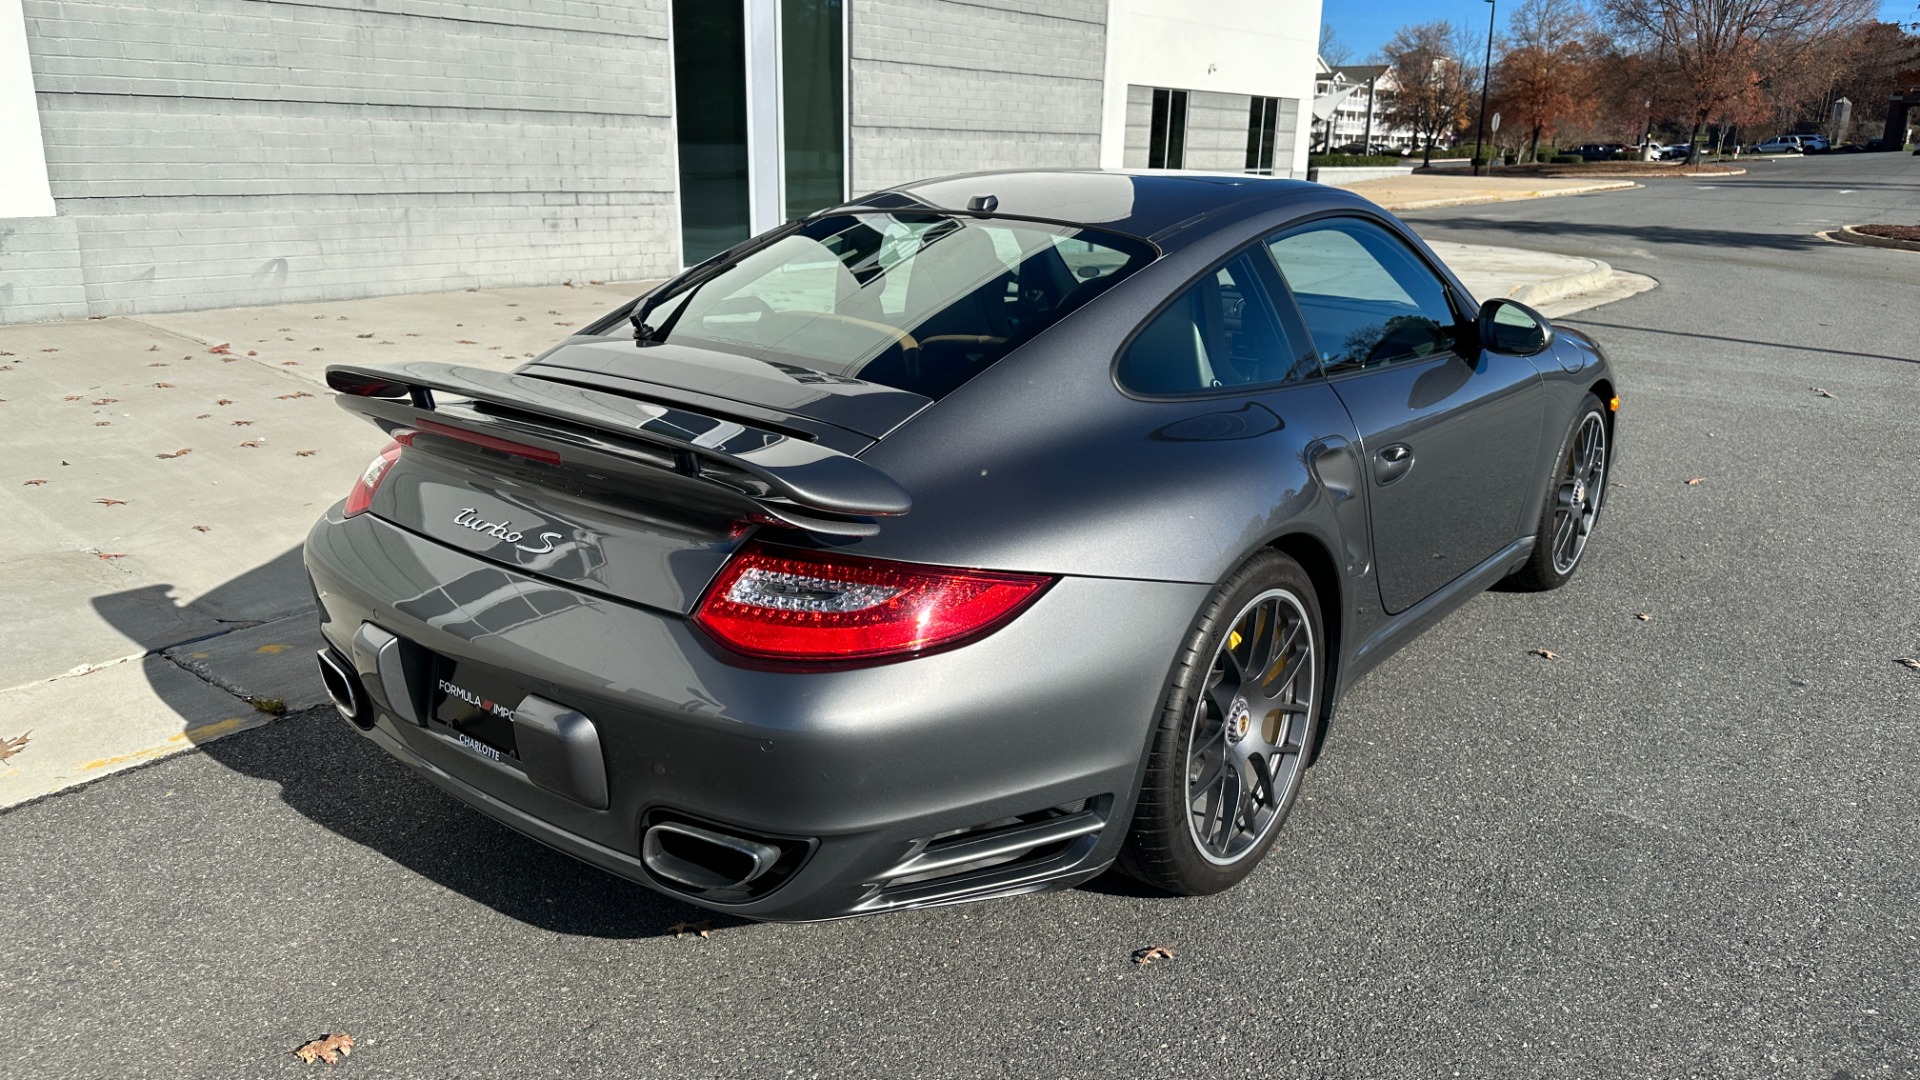 Used 2012 Porsche 911 TURBO S / CENTER LOCK WHEELS / FULL LEATHER INTERIOR / YELLOW CALIPERS / PA for sale Sold at Formula Imports in Charlotte NC 28227 7